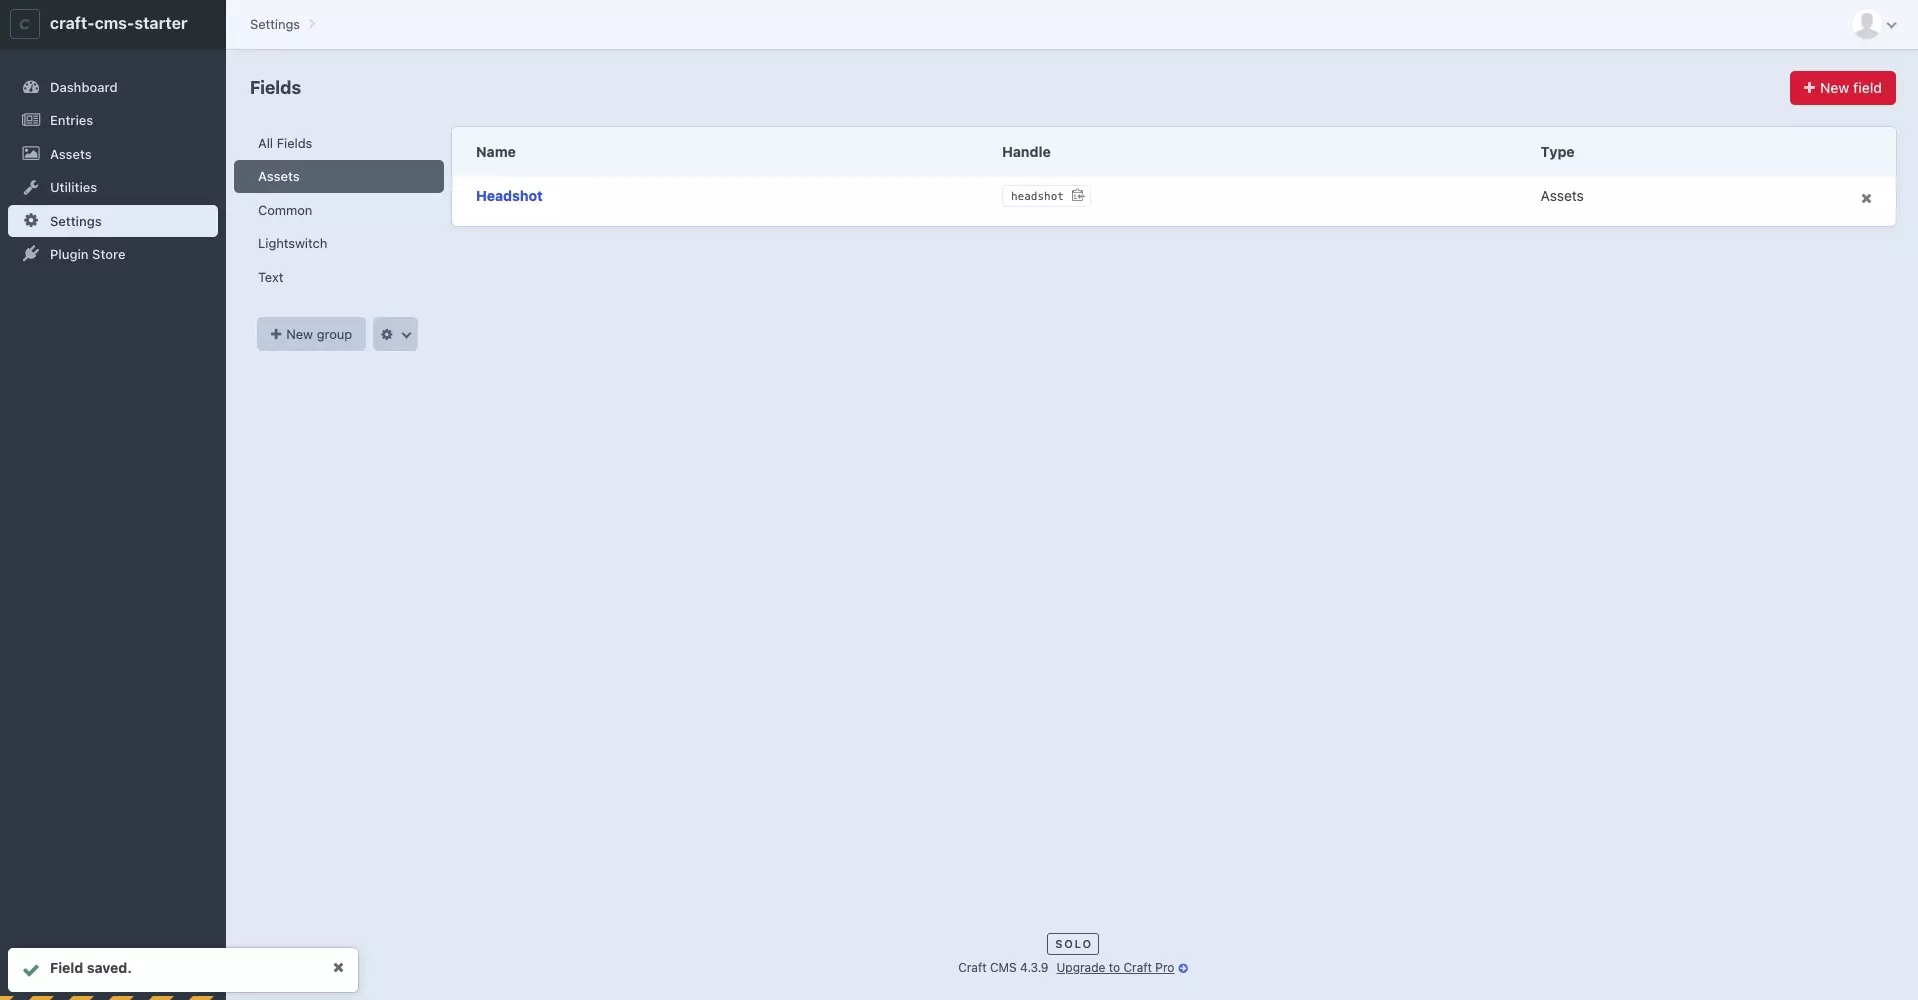 A screenshot of the Craft CMS Fields page showing the newly created field.